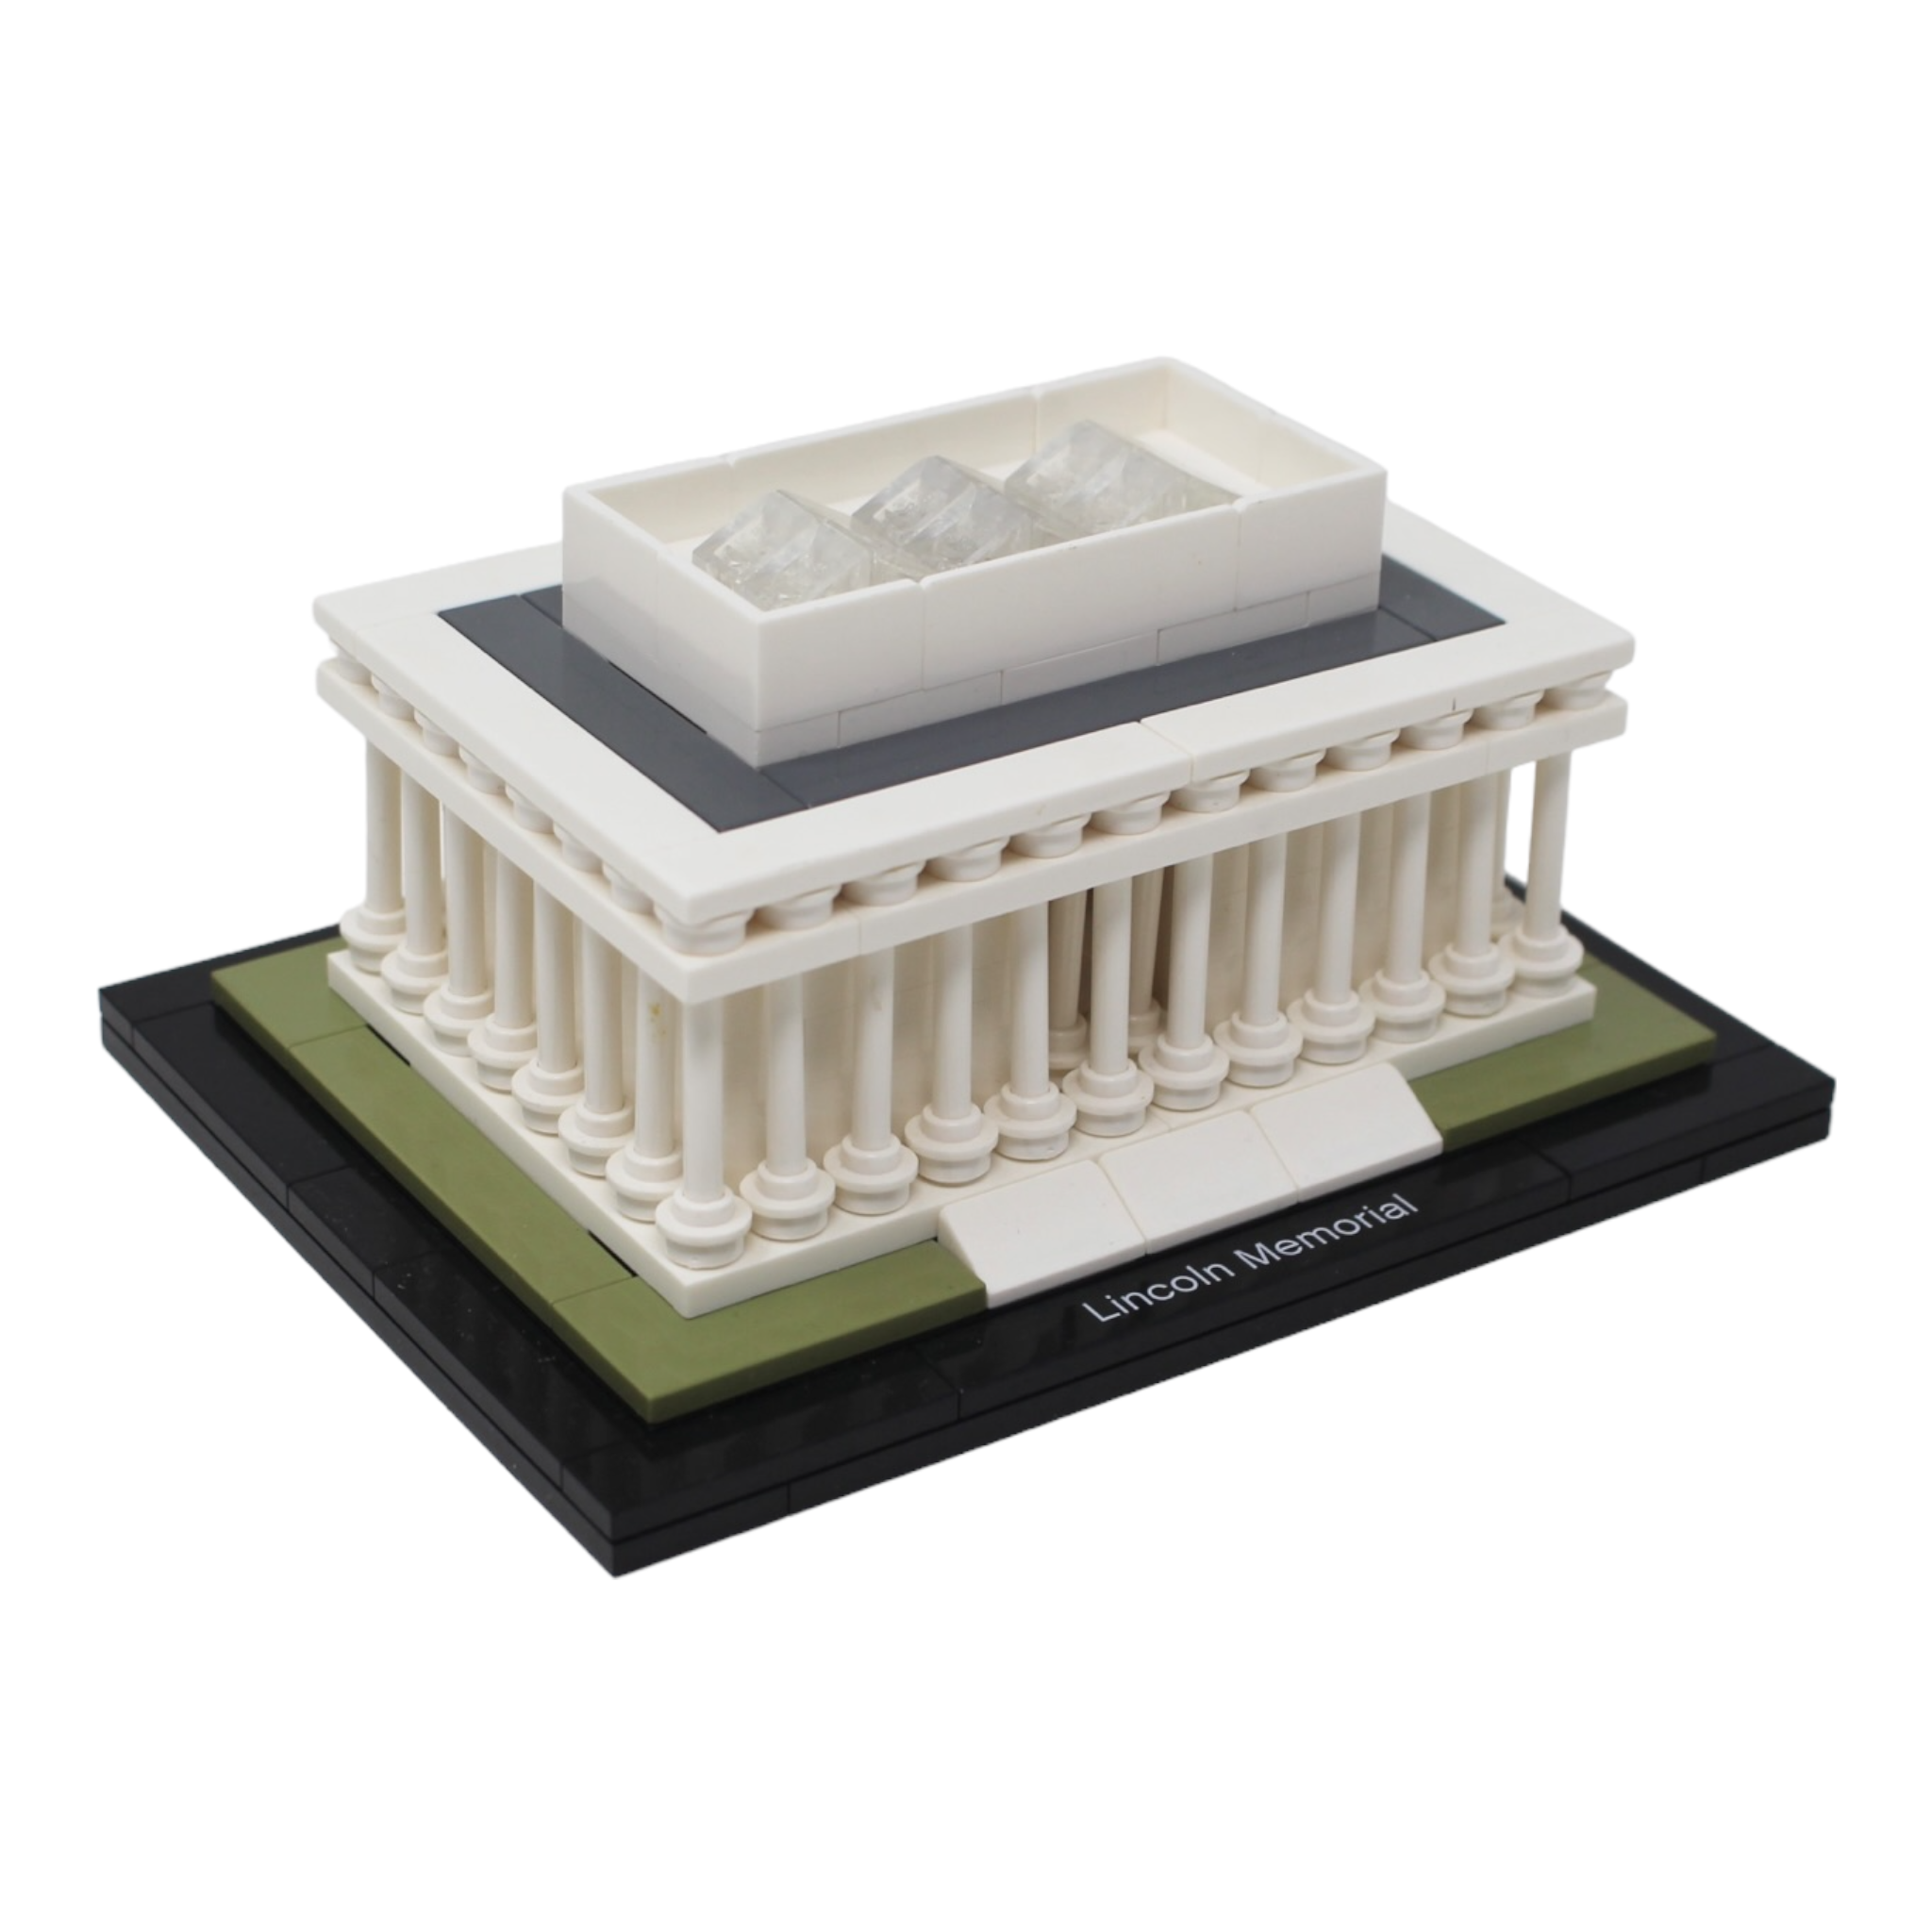 Used Set 21022 Architecture Lincoln Memorial